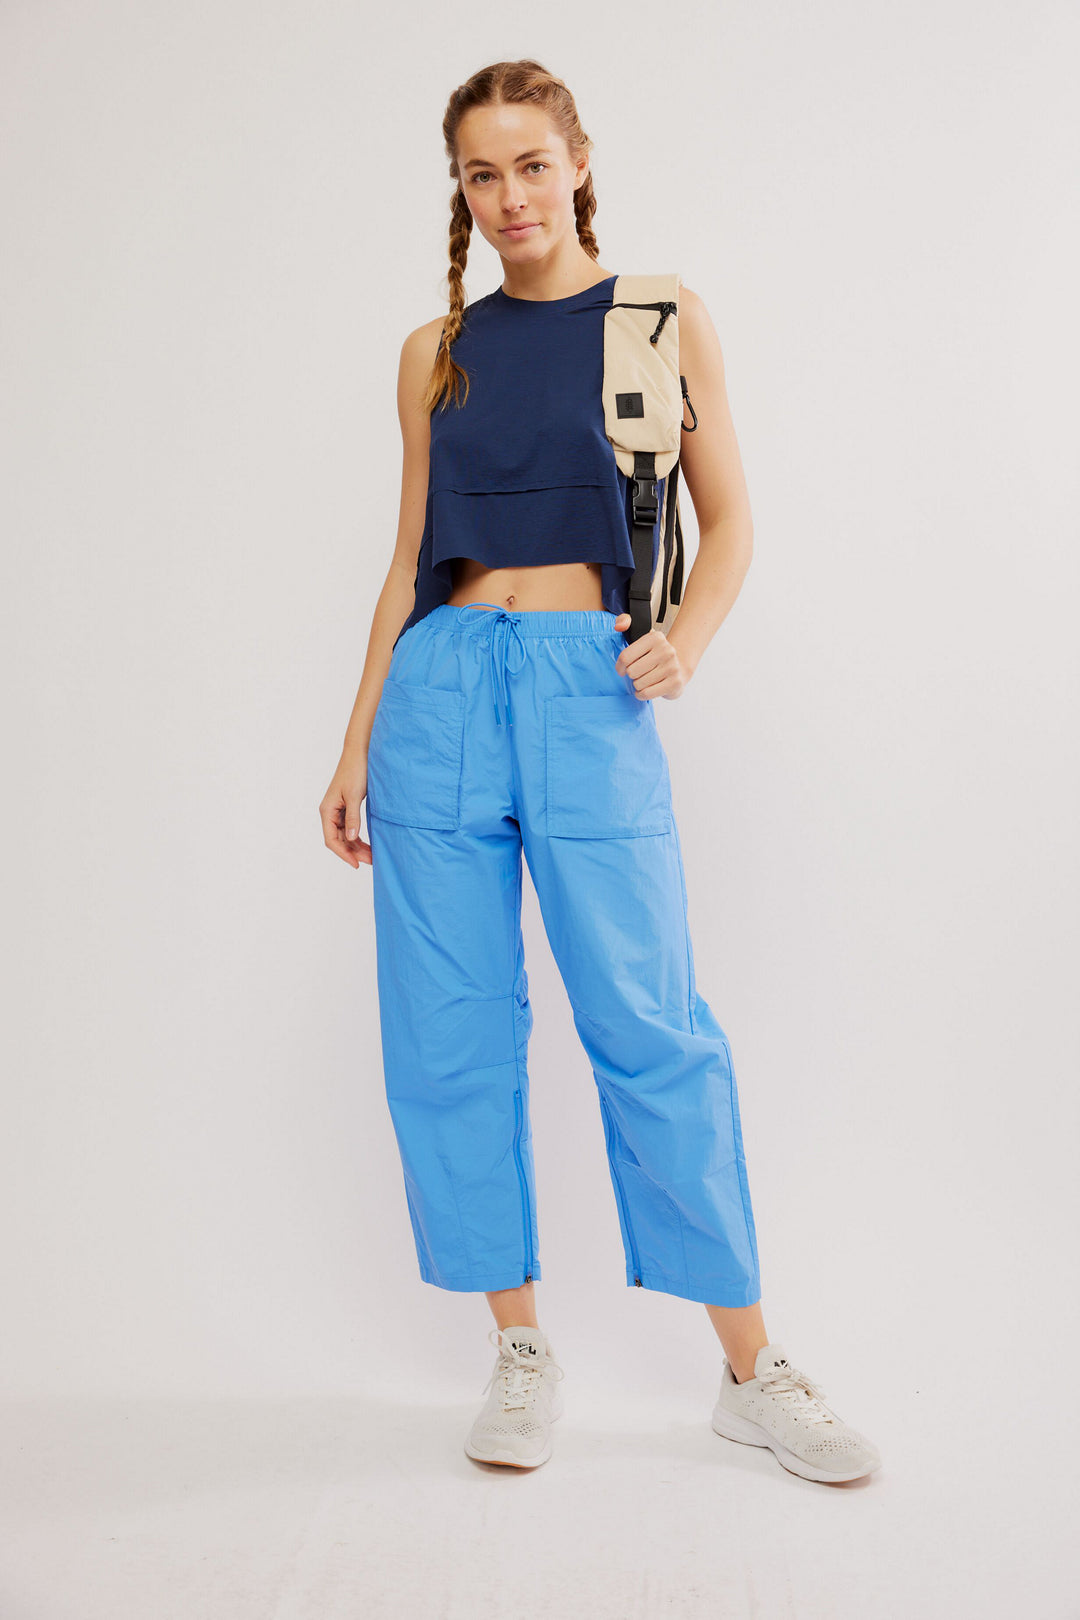 Free People Fly By Night Pant